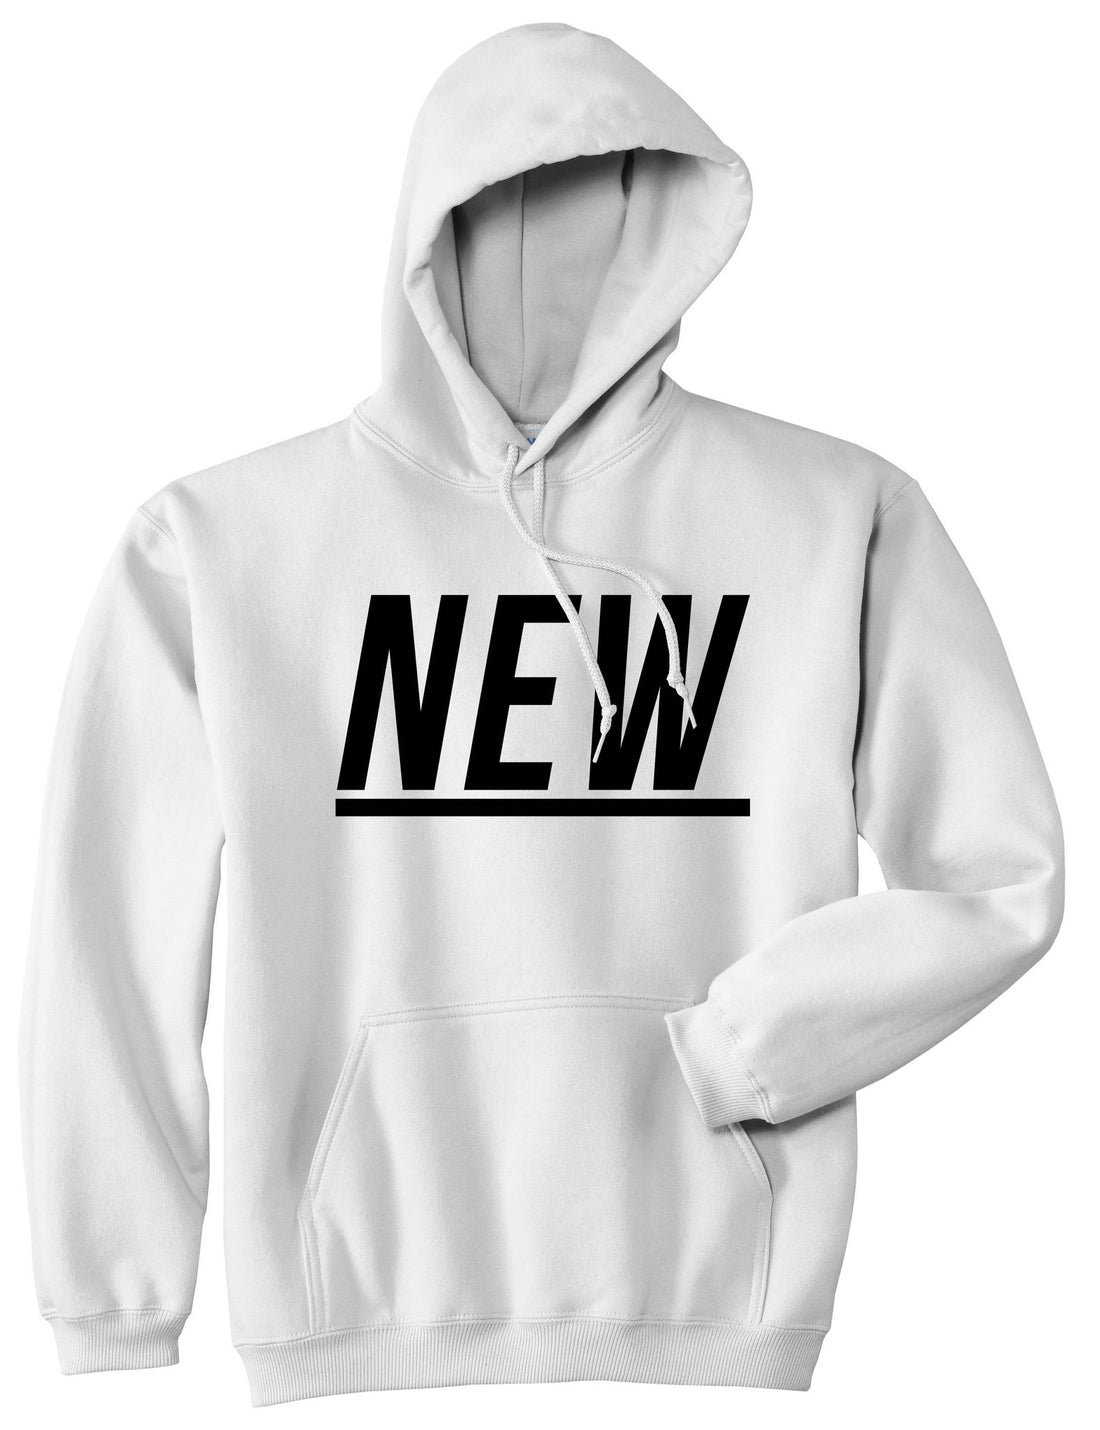 New Pullover Hoodie Hoody in White by Kings Of NY